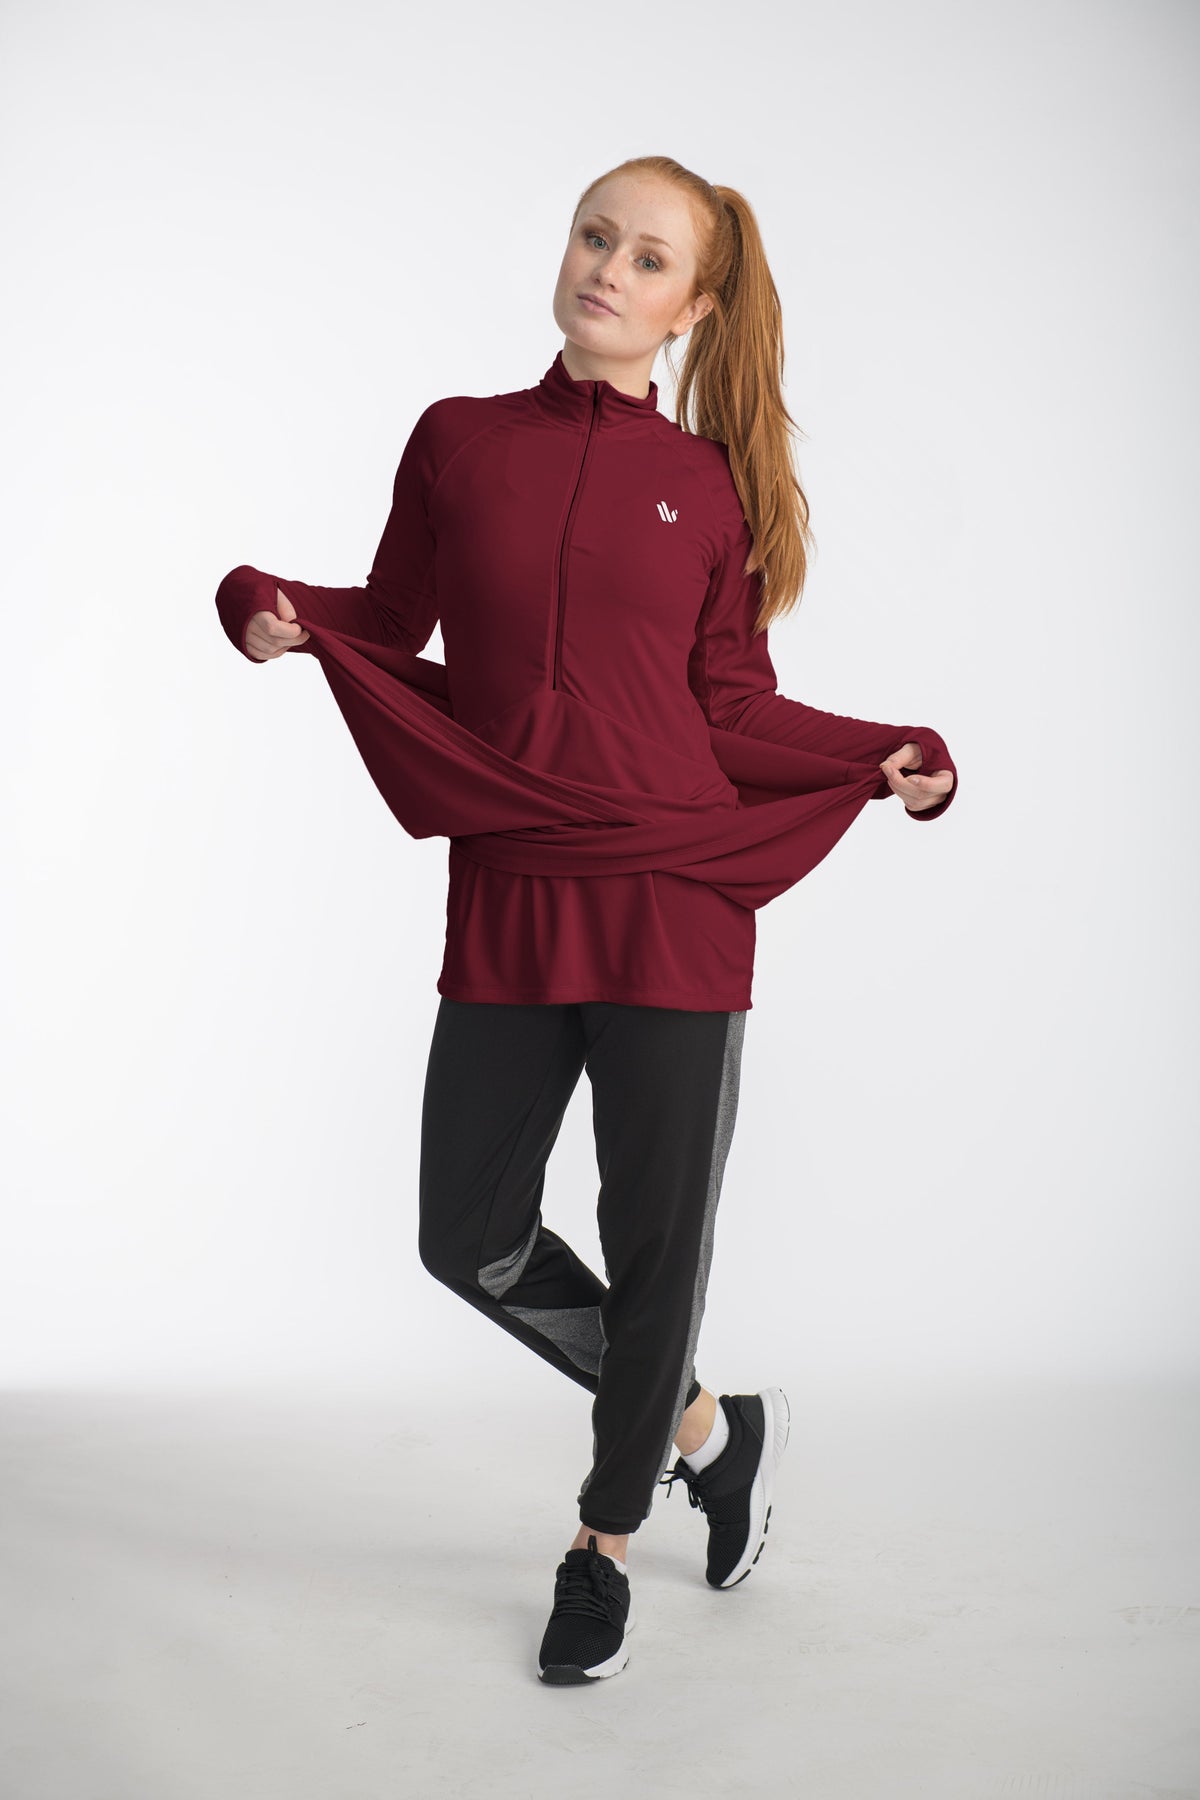 Modest Workout Clothing – Dignitii Activewear